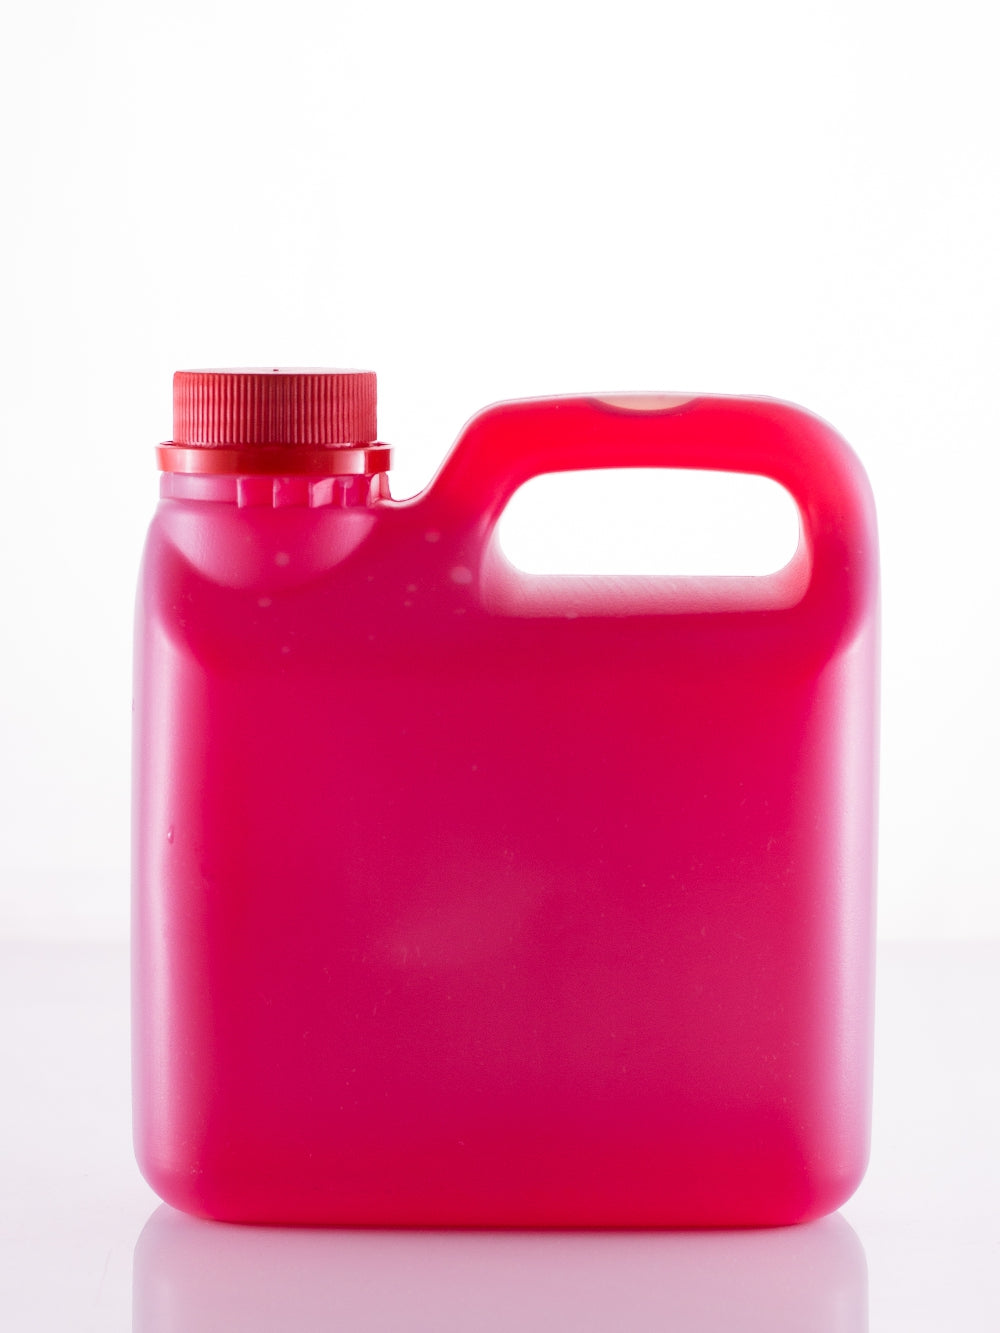 1Lt Rectangle Jerry Can 50g Bottle - (Pack of 50 units)